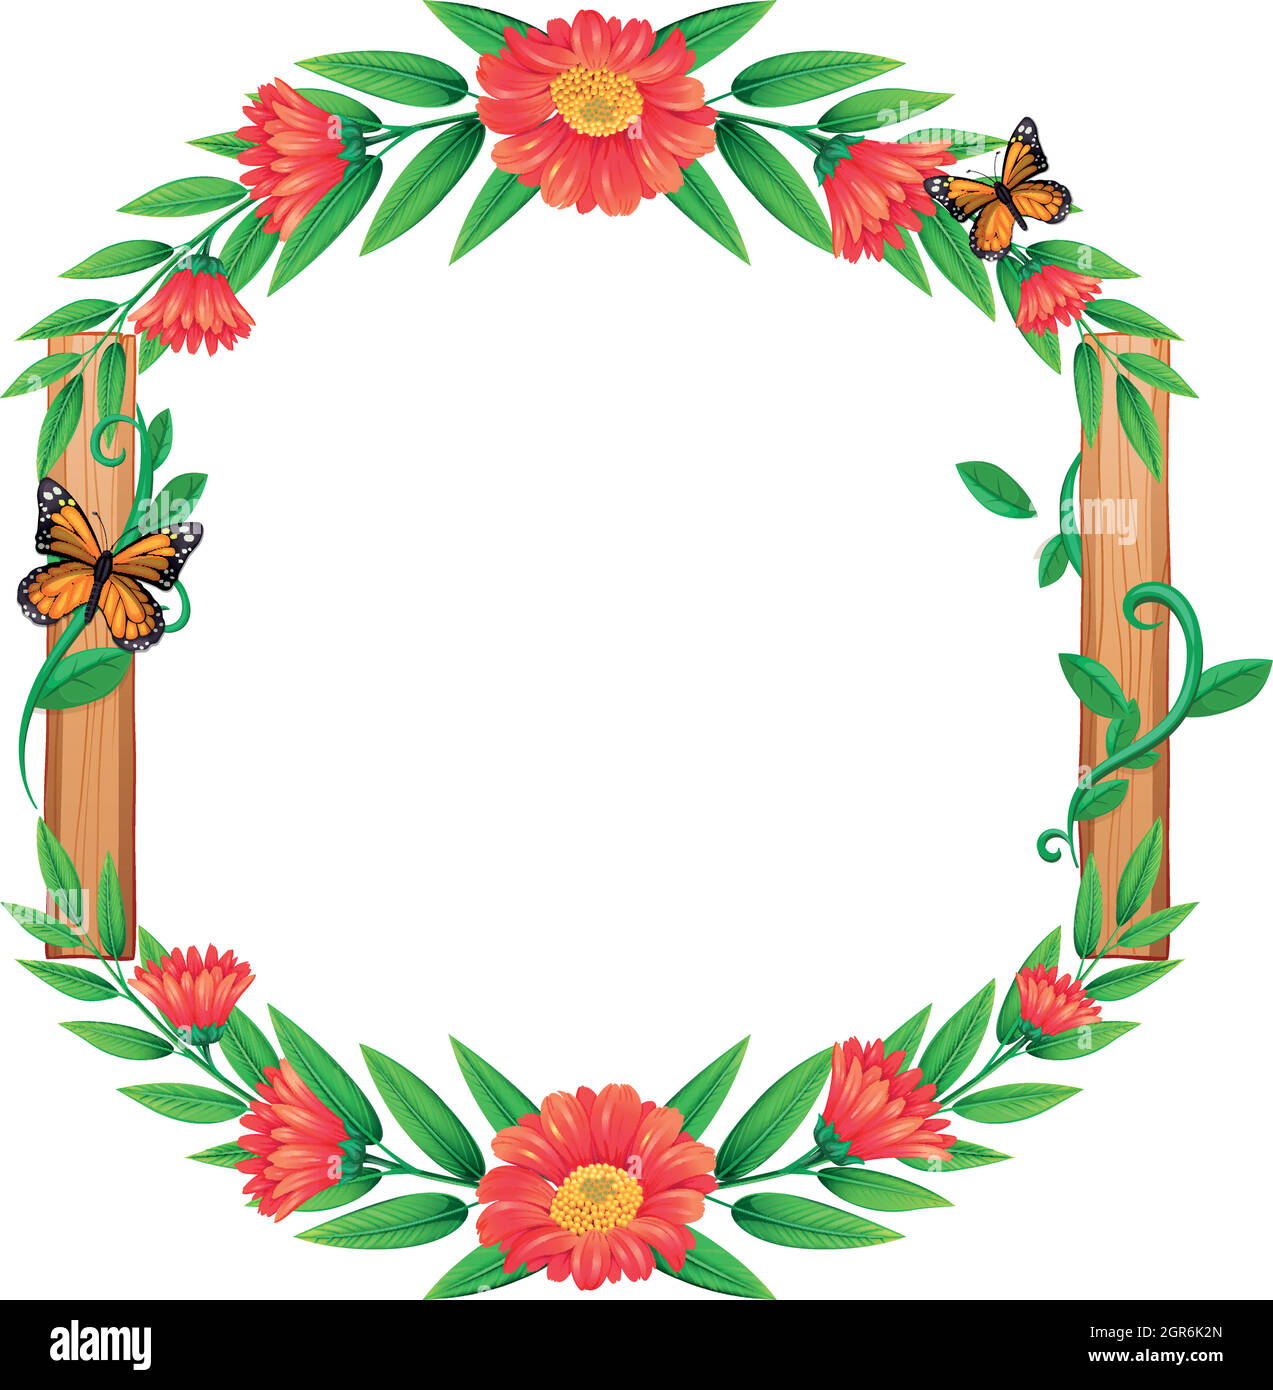 Frame design with flowers and butterflies Stock Vector